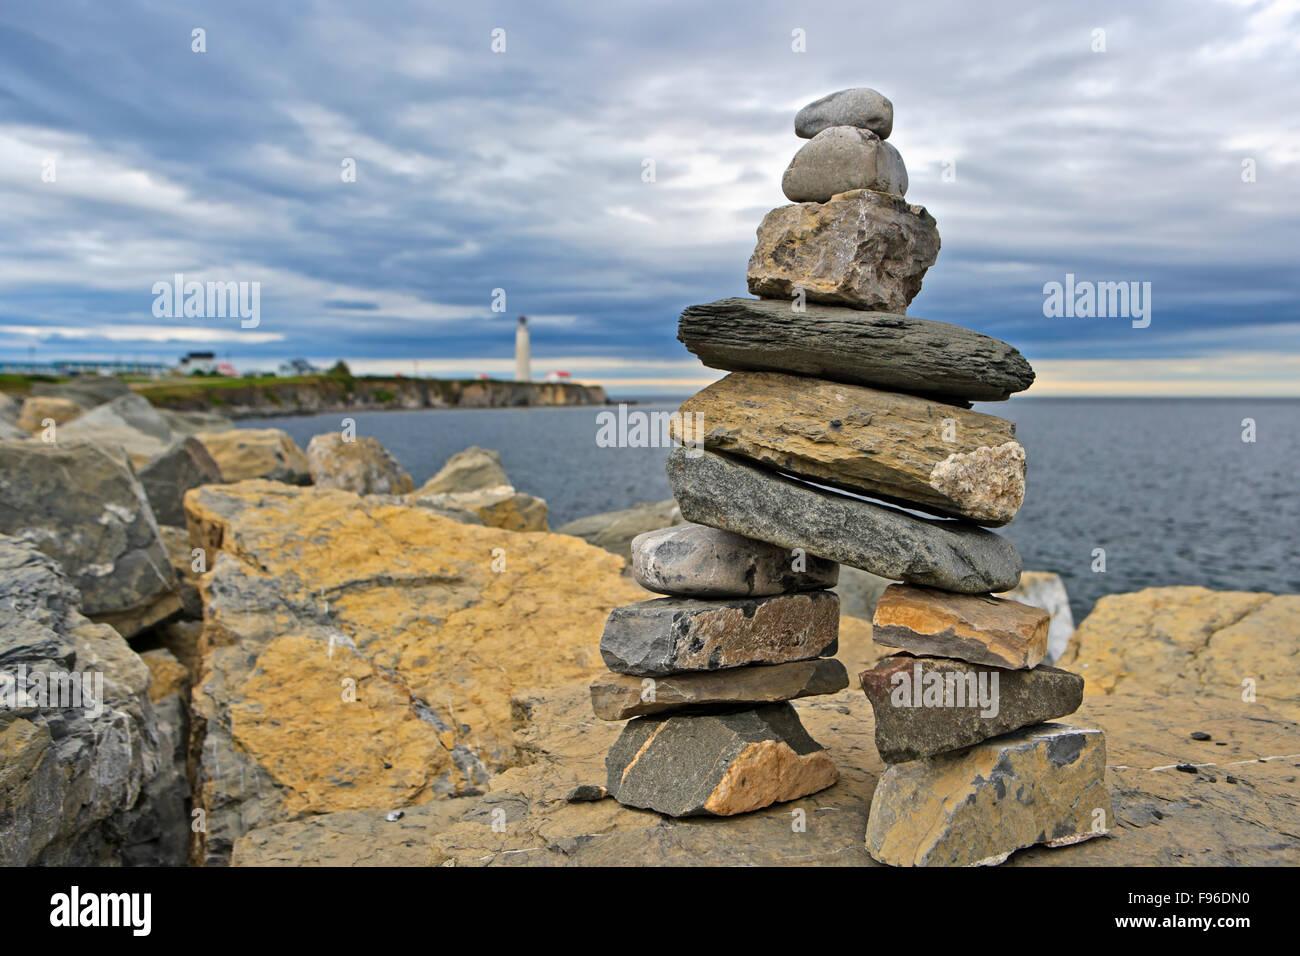 Stone figure with CapdesRosiers Lighthouse in the background, Land's End, Gaspesie, Gaspesie Peninsula, Highway 132, Quebec, Stock Photo